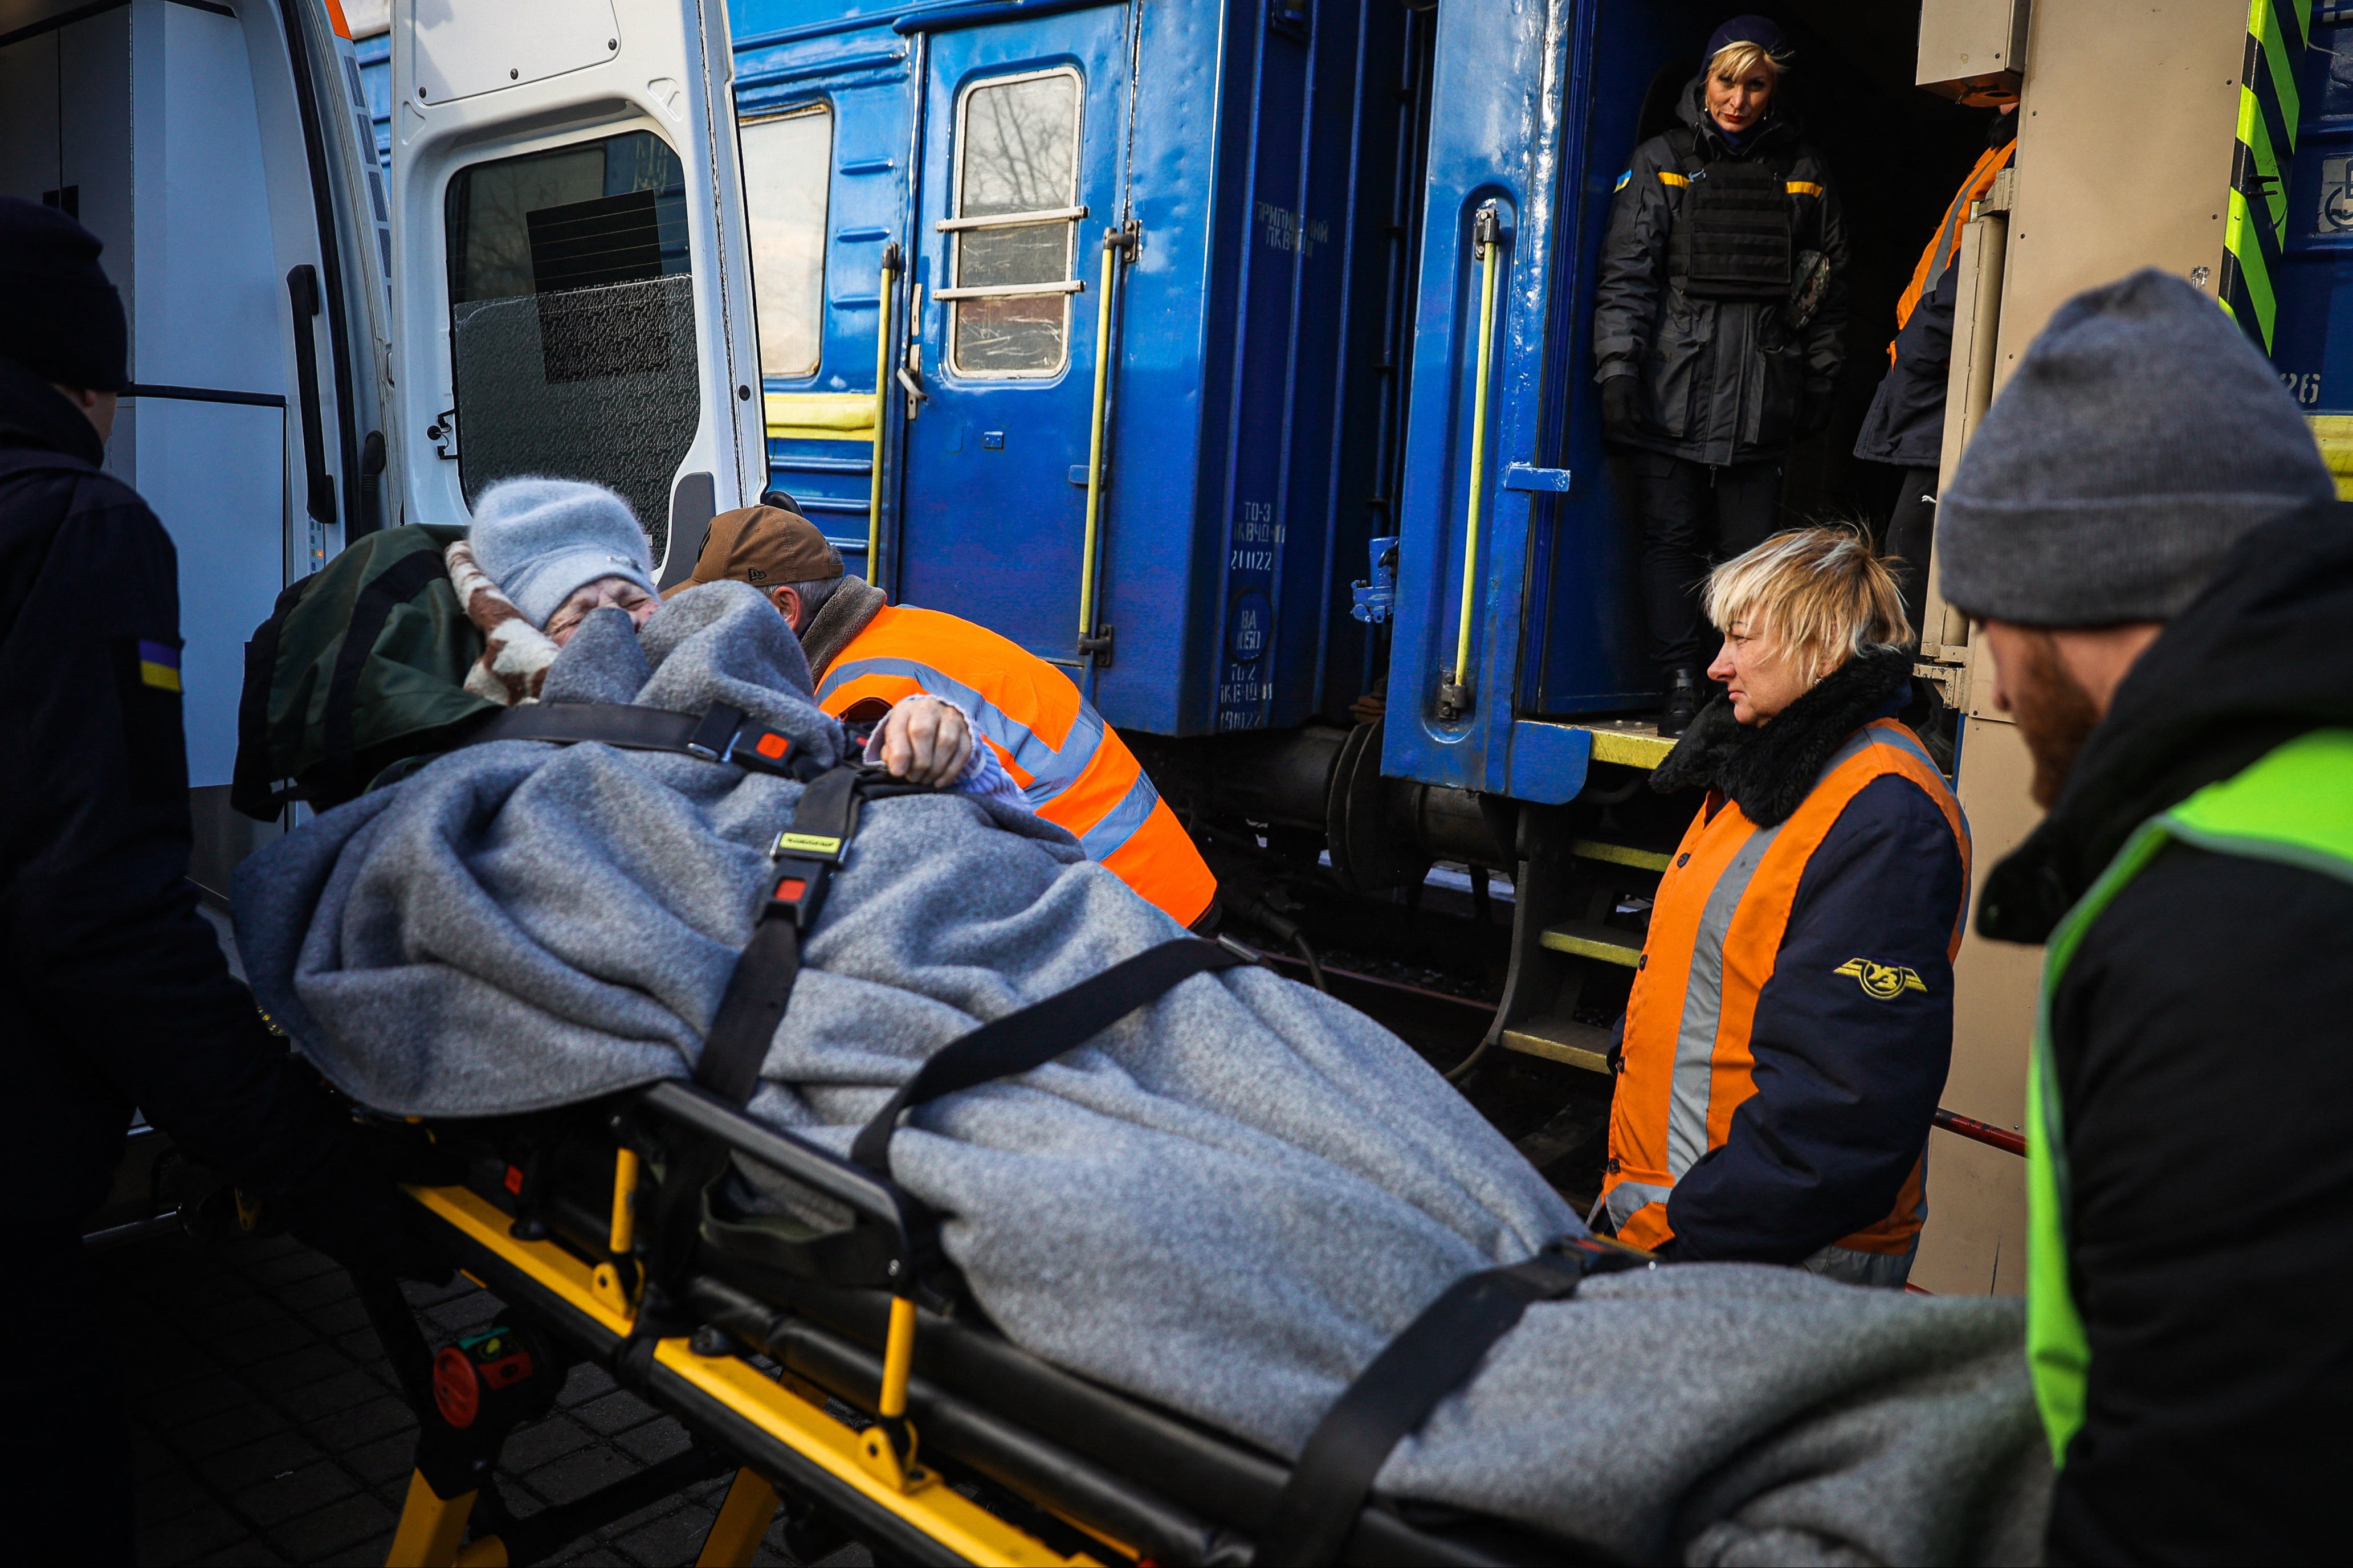 Members of the Vostok SOS team help a woman with limited mobility to get on an evacuation train in Pokrovsk, Donetsk region